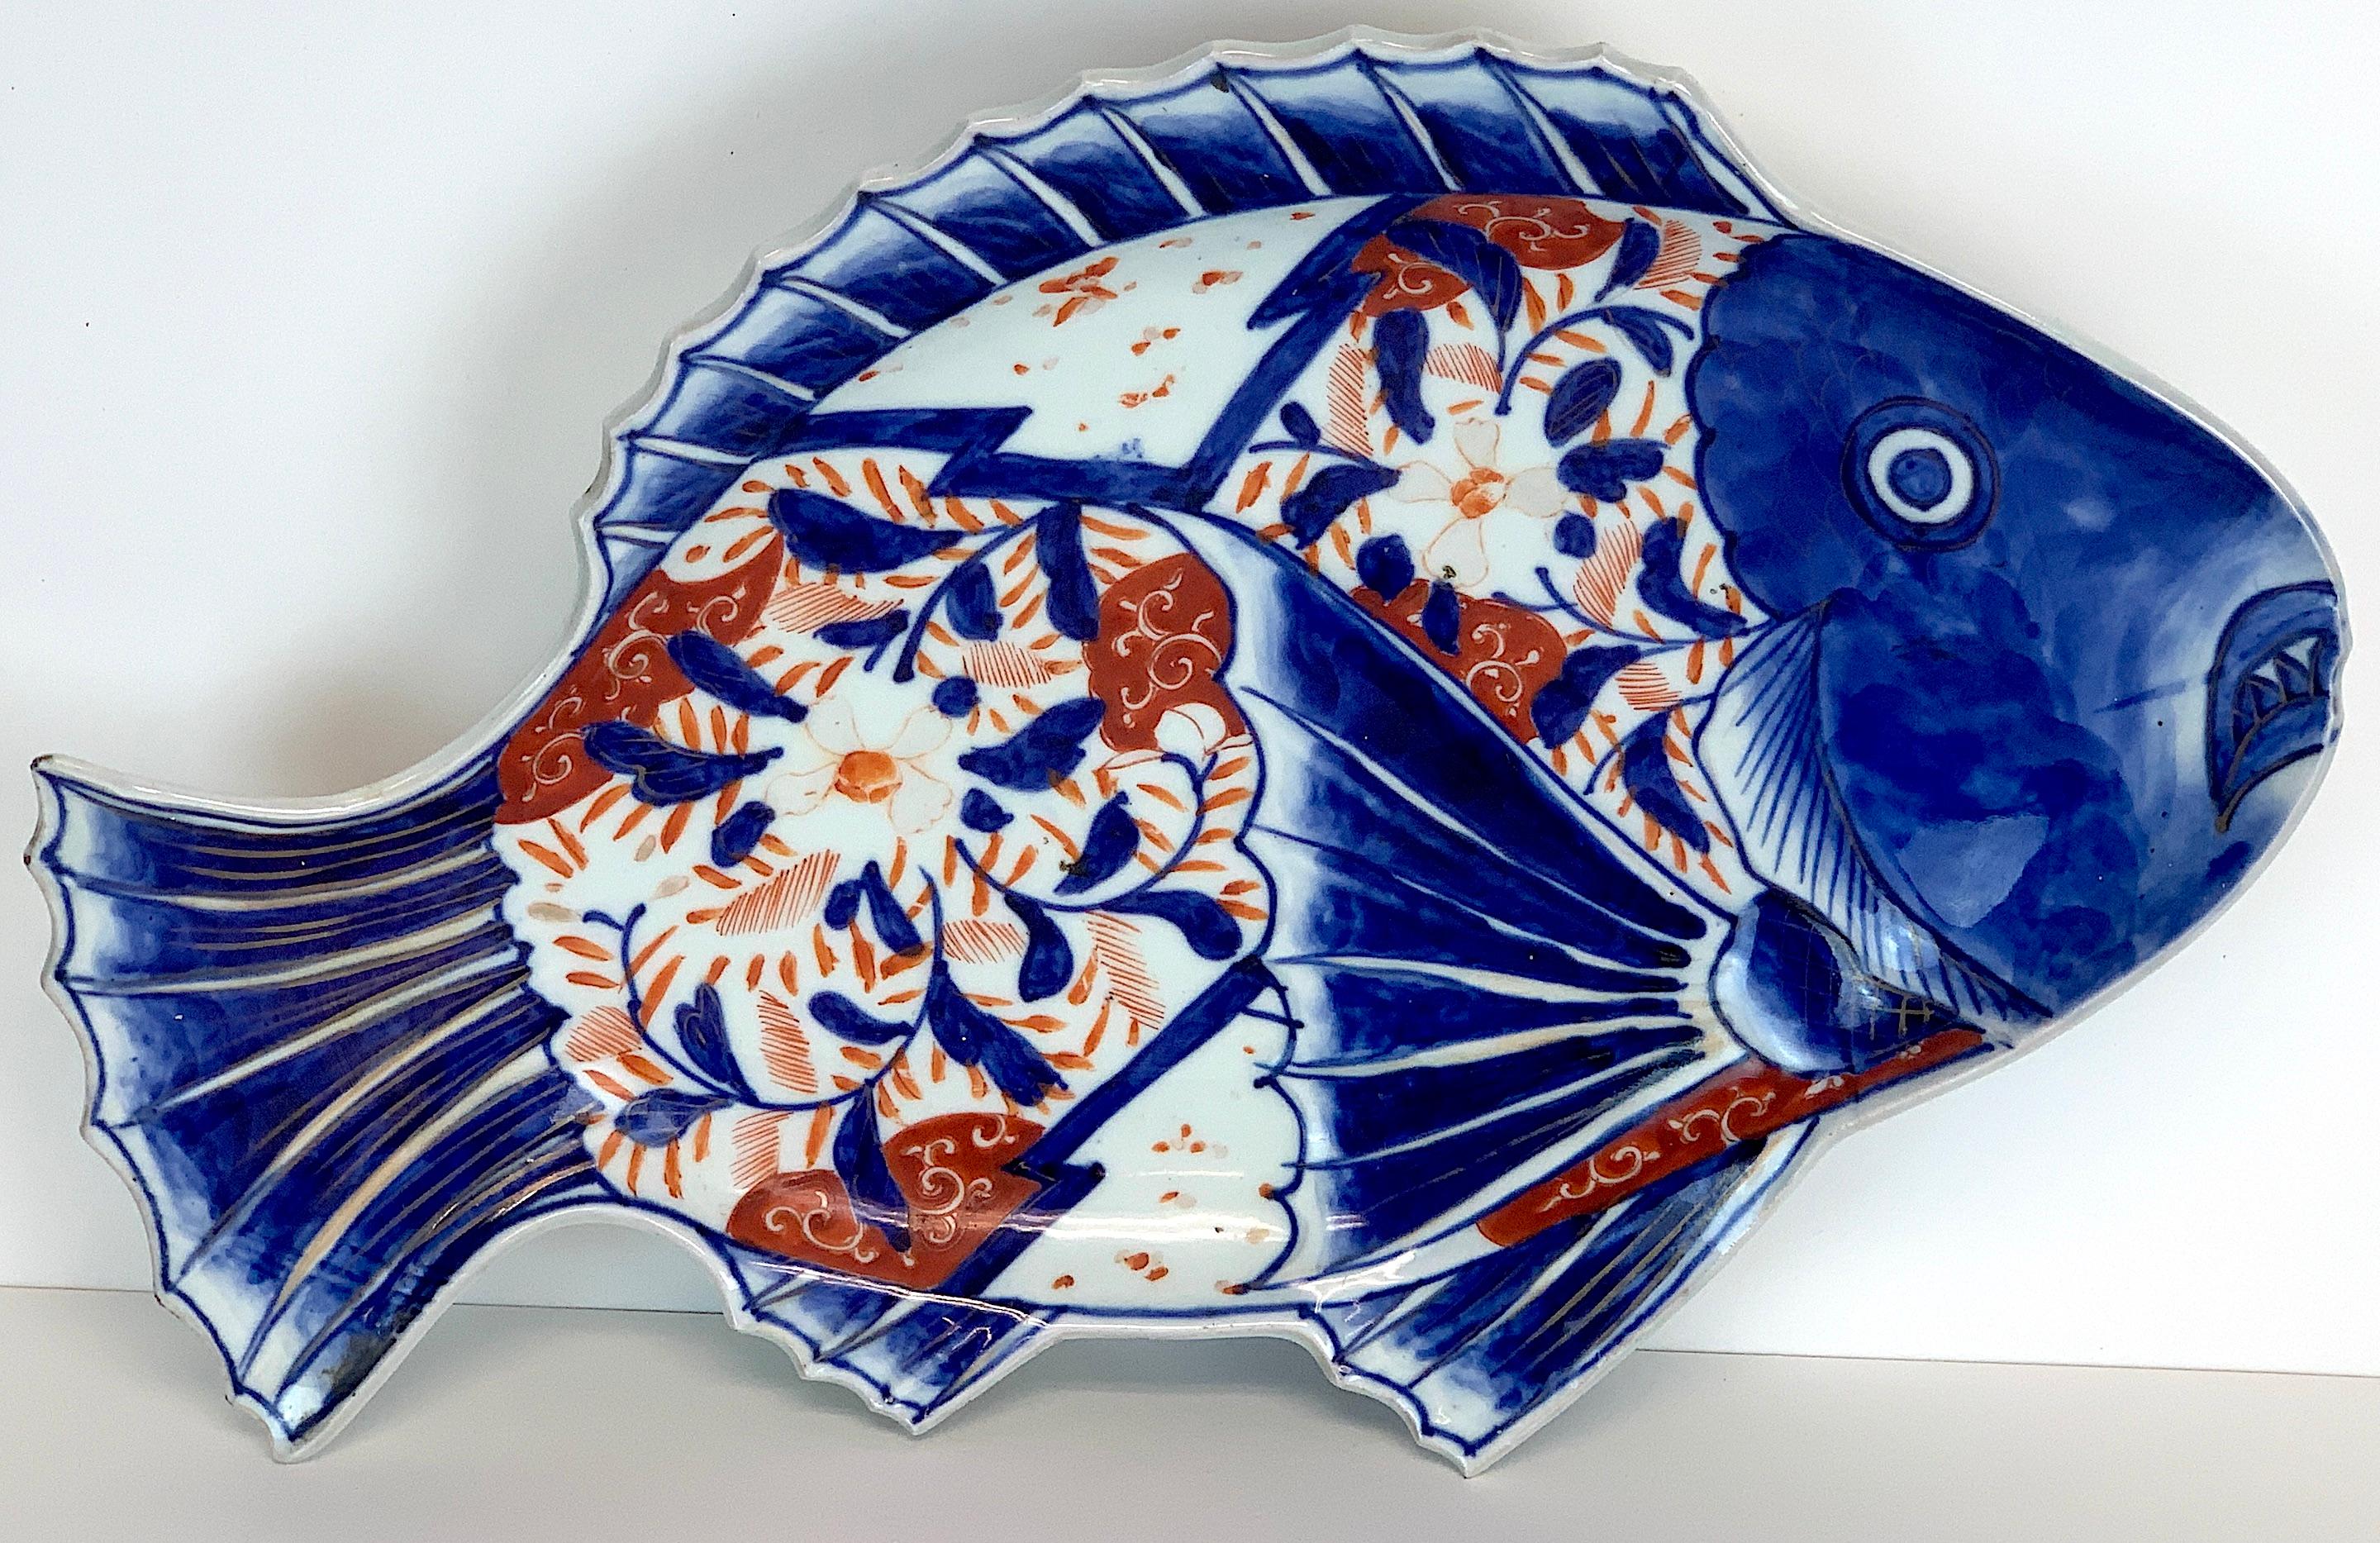 Large Meiji Imari fish plate, VI
A fine example, well decorated, good size, Unmarked, circa 1890
This examples measures 16-inches wide x 10.75-inches high.
Part of a collection of eight fine Imari examples, The VI is for internal inventory